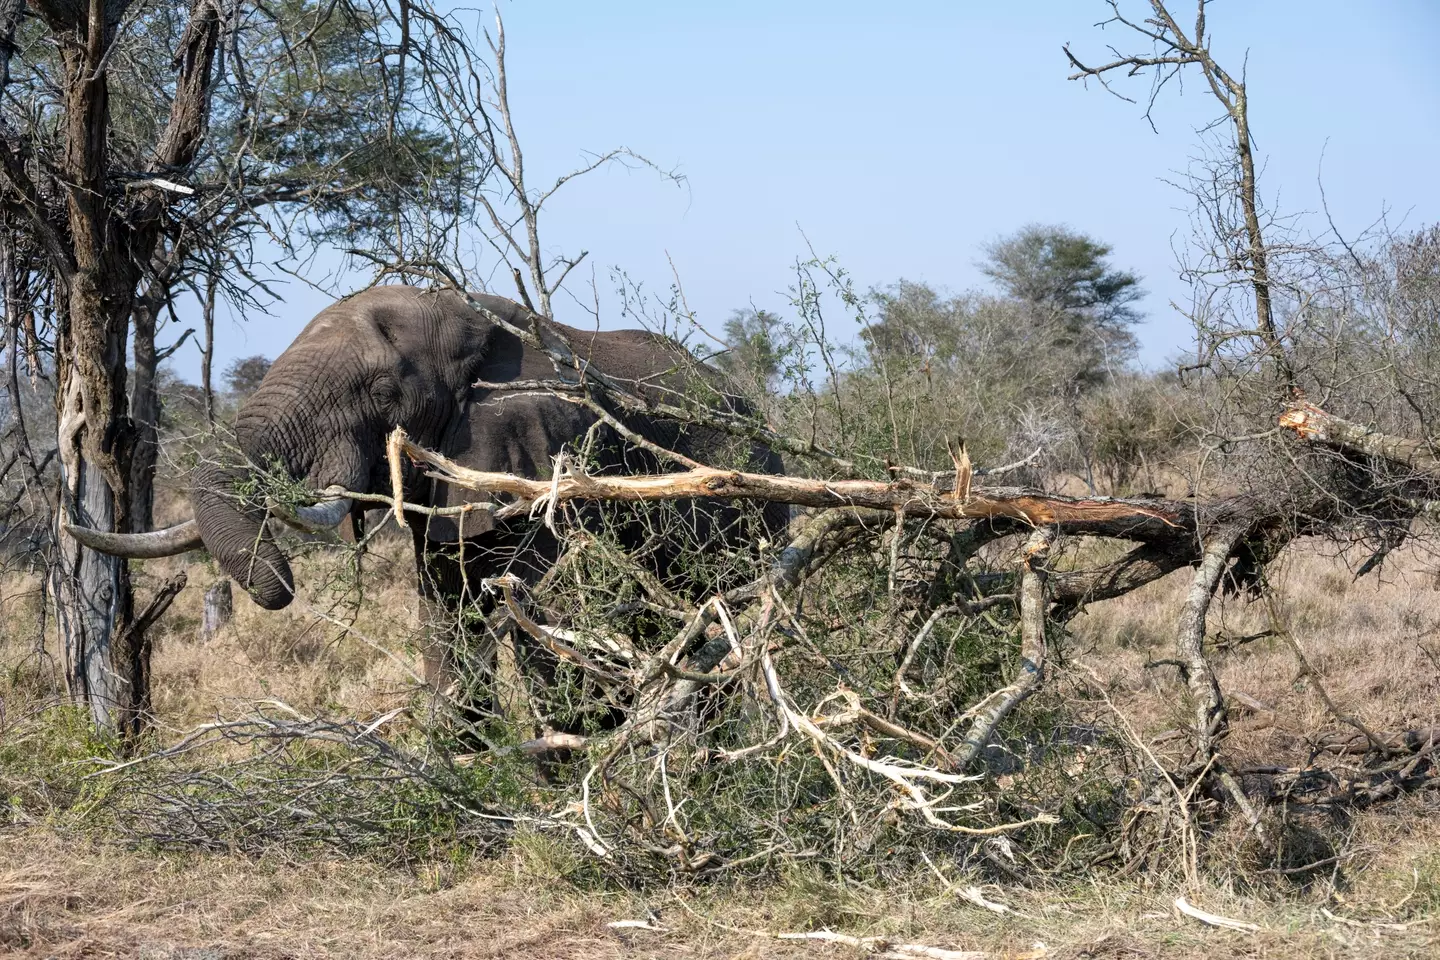 Elephants get nutrients from trees and their roots.